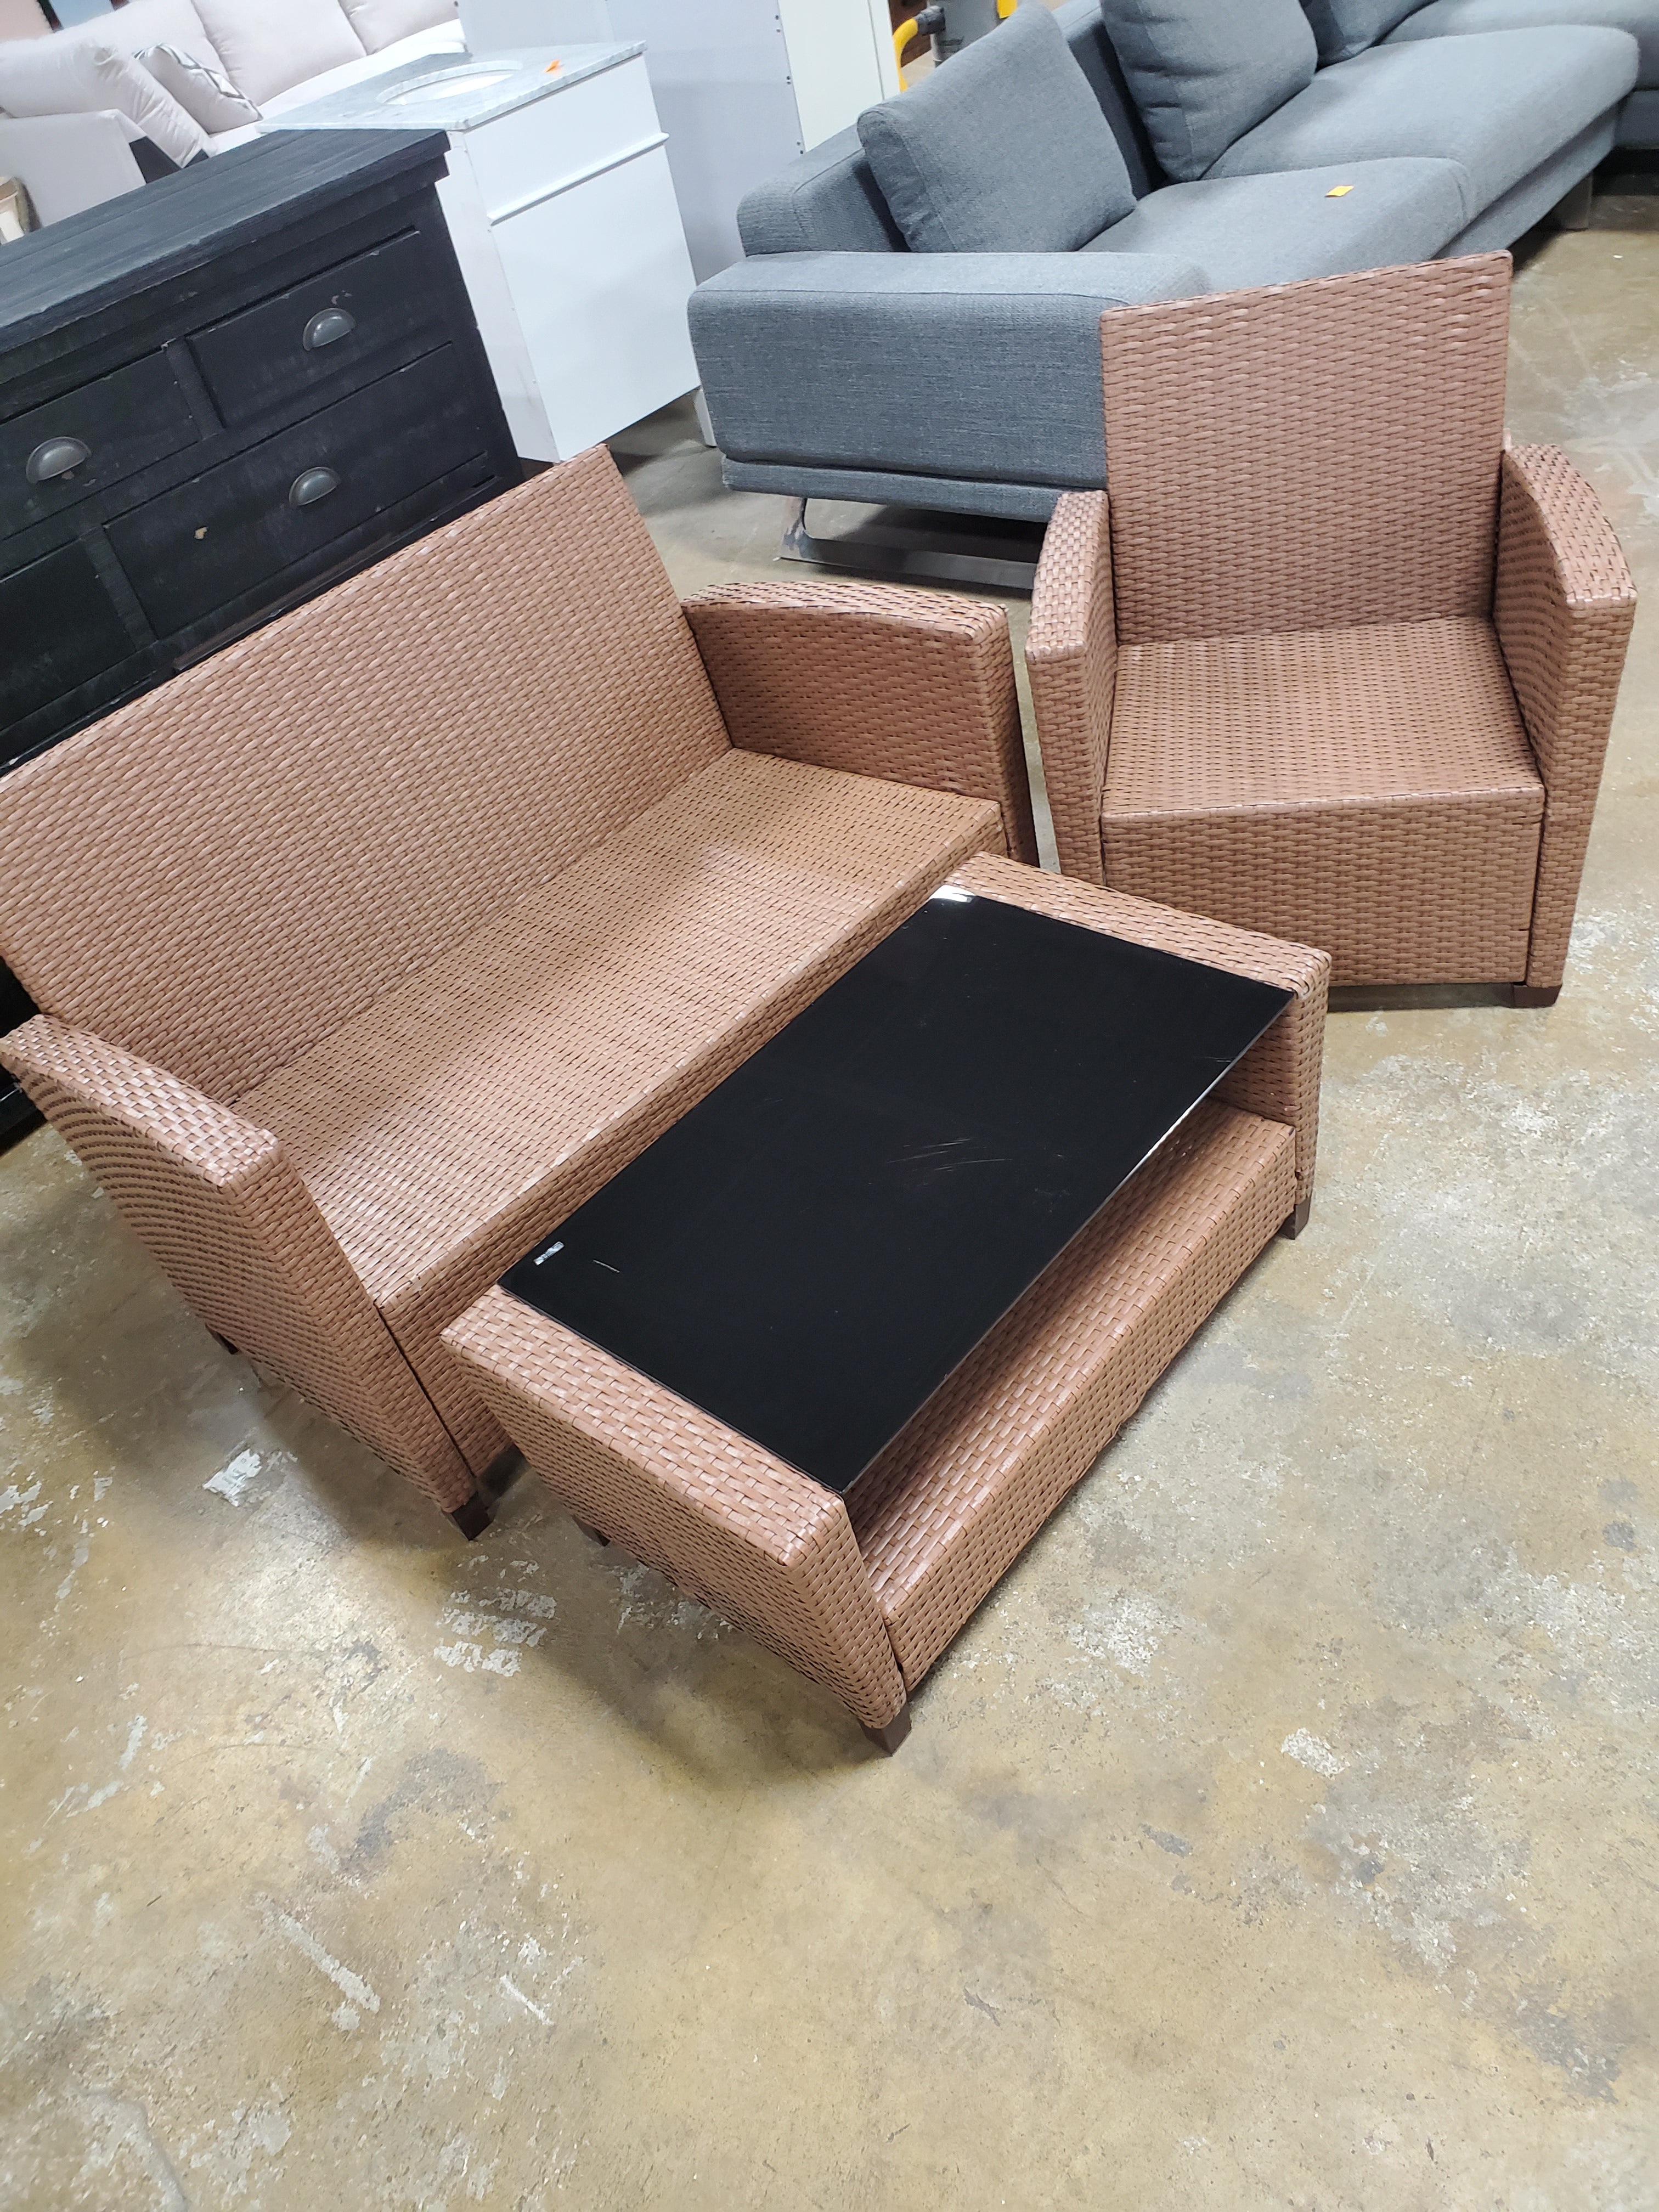 Cosco Patio Loveseat, Coffee Table and Chair Only